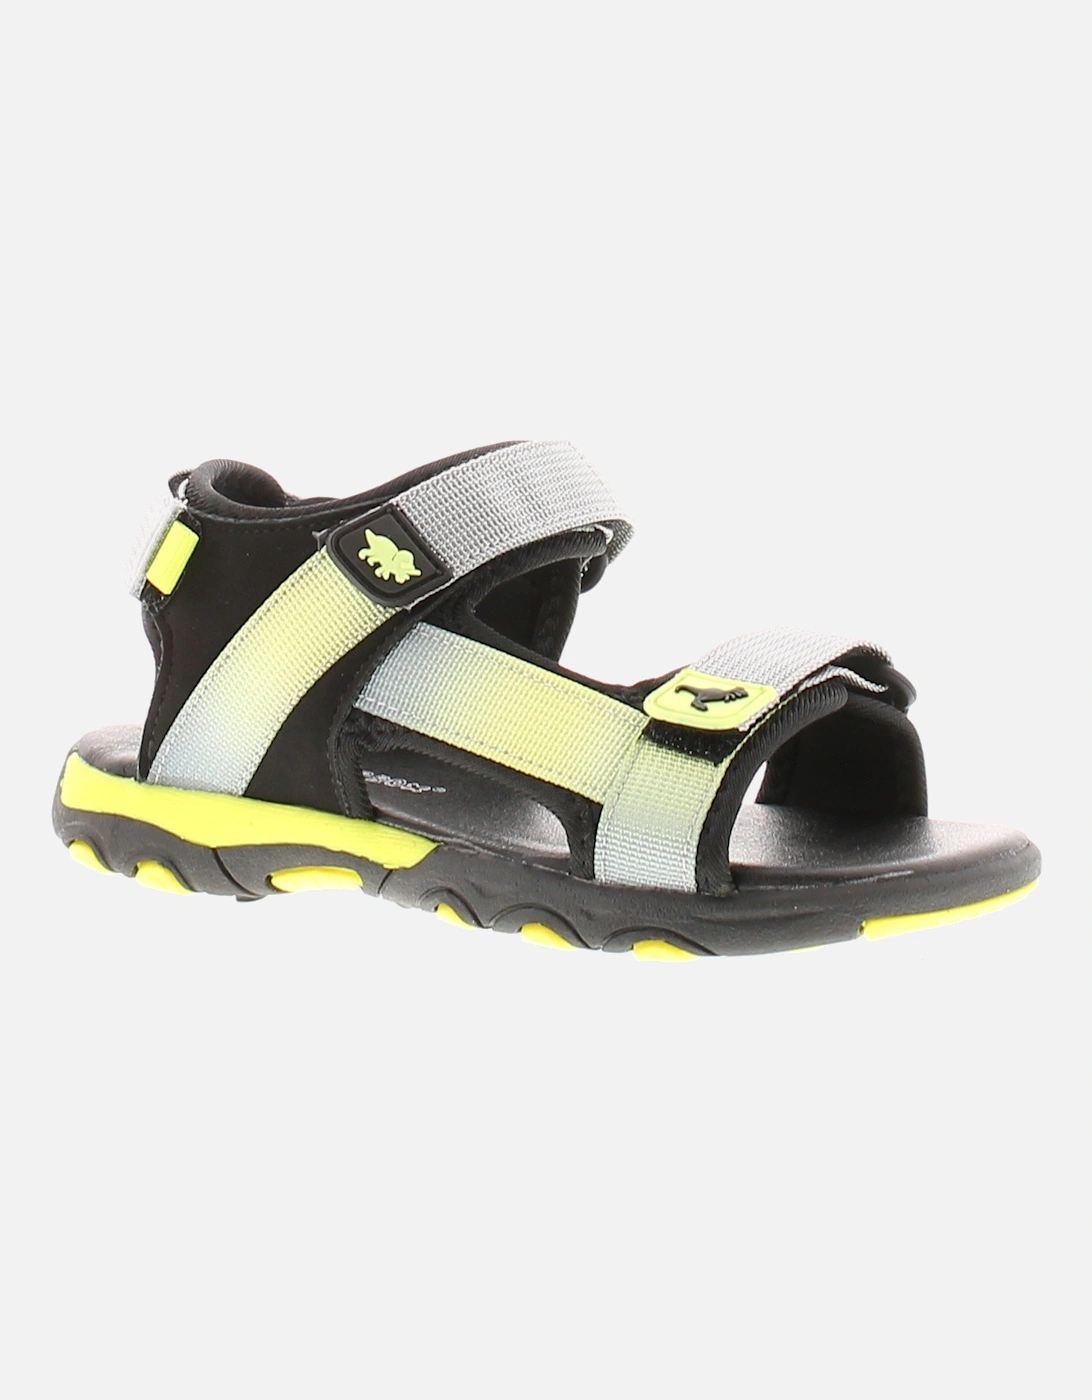 Younger Childrens Sandals Dan Black Yellow UK Size, 6 of 5